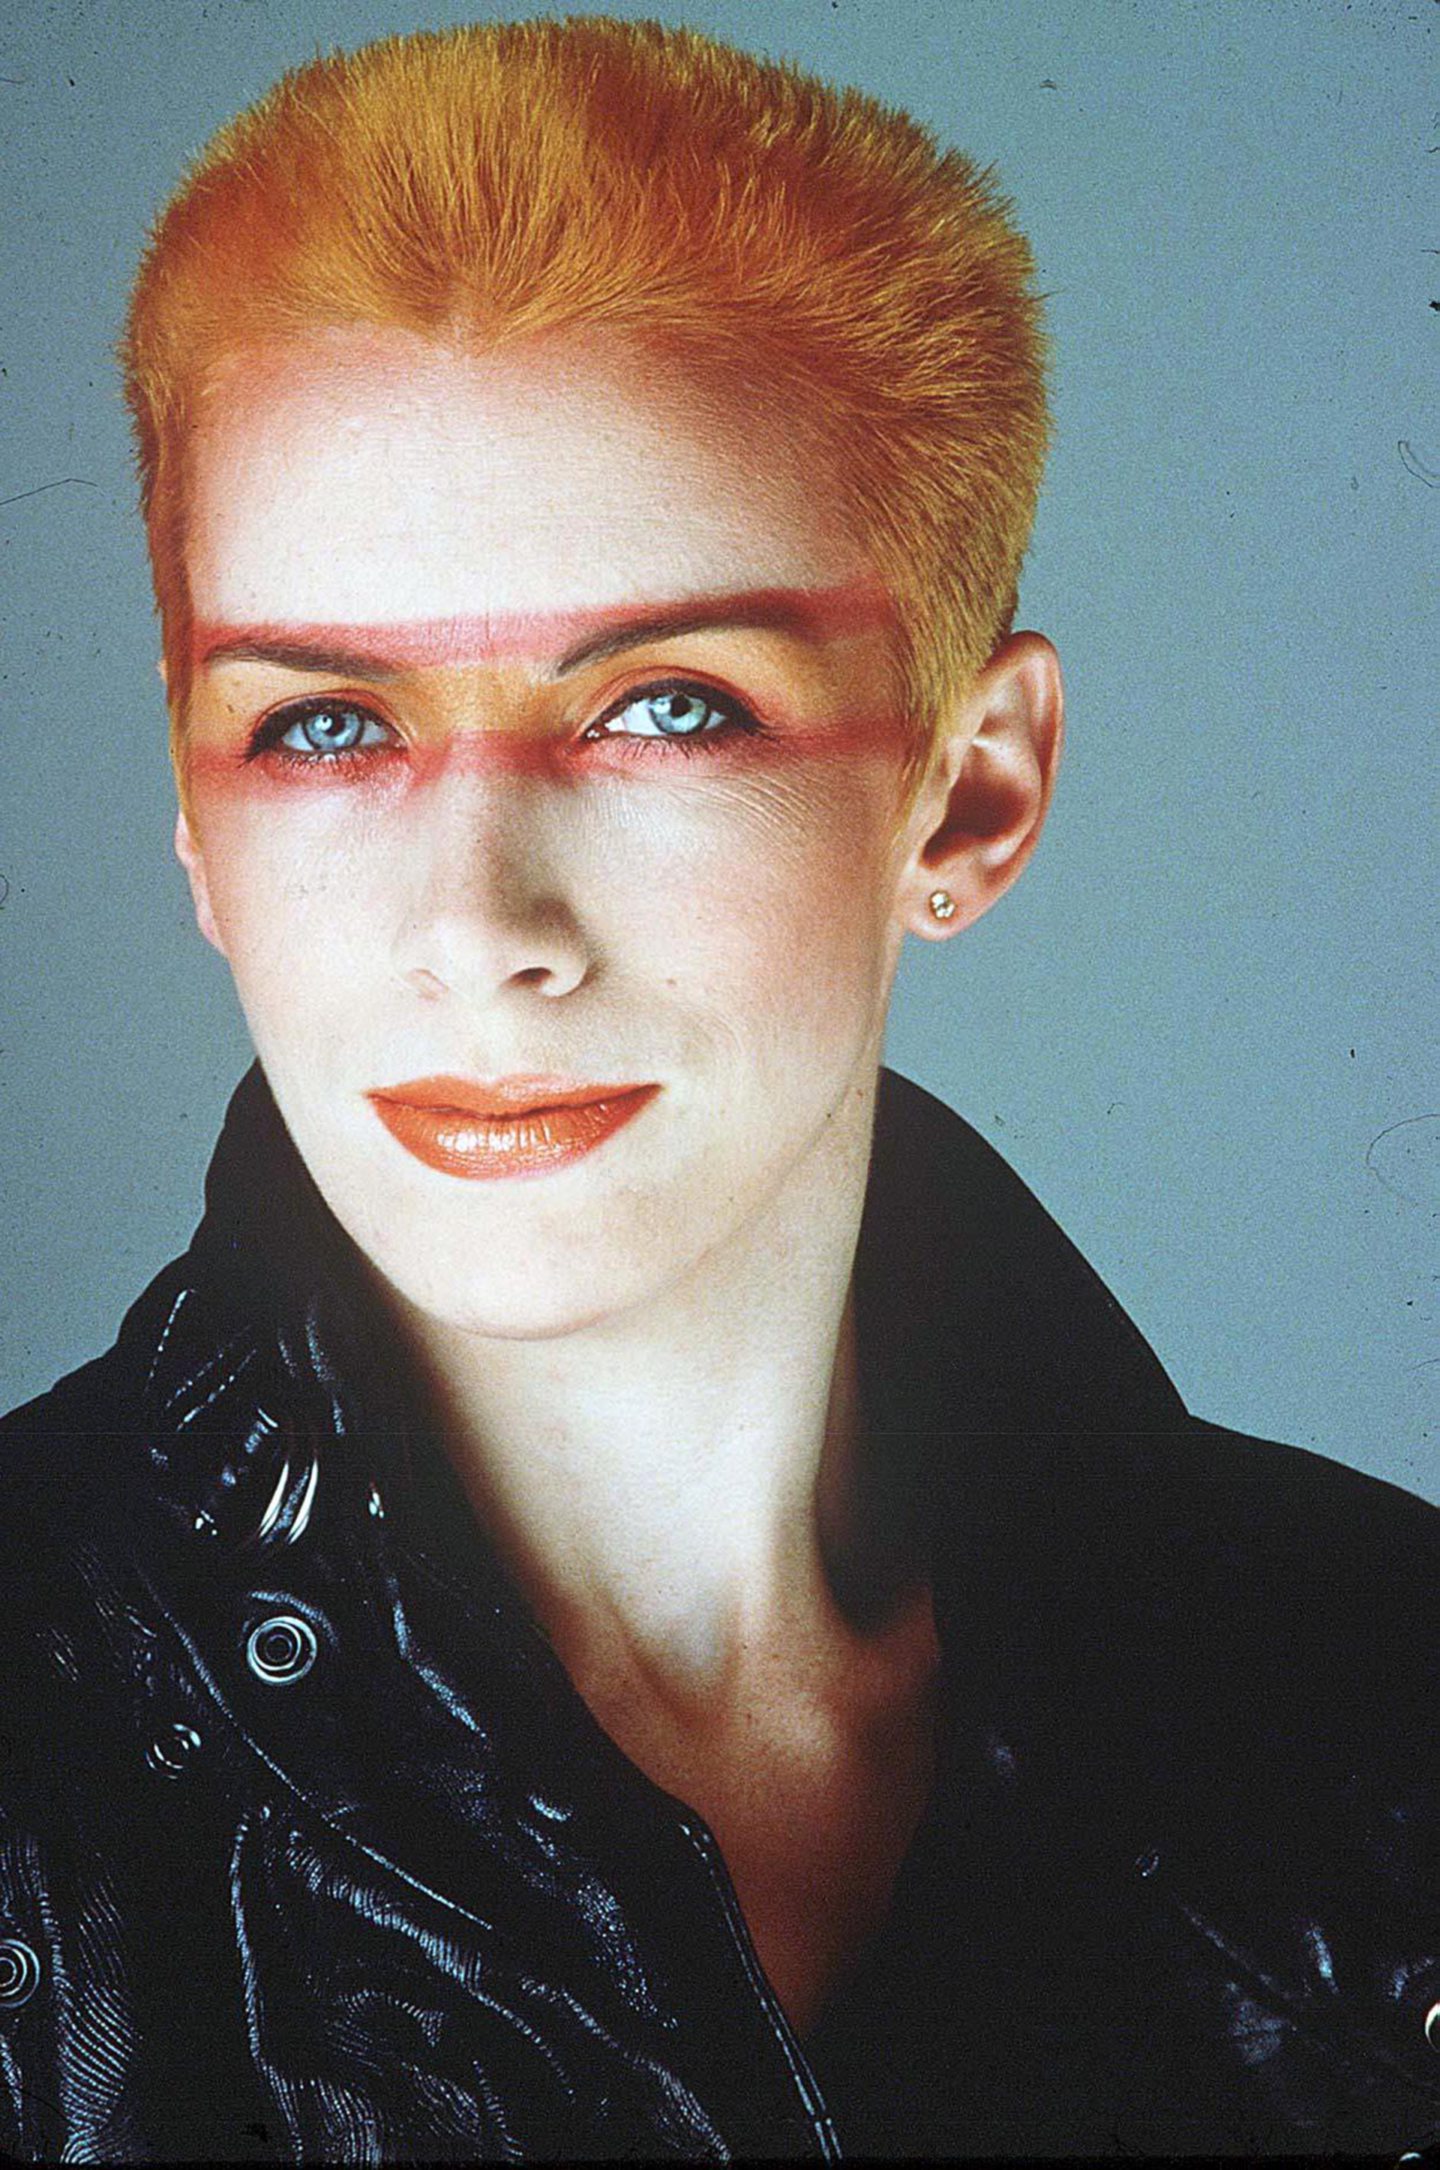 Annie Lennox was distraught at the failure of Eurythmics' first album.